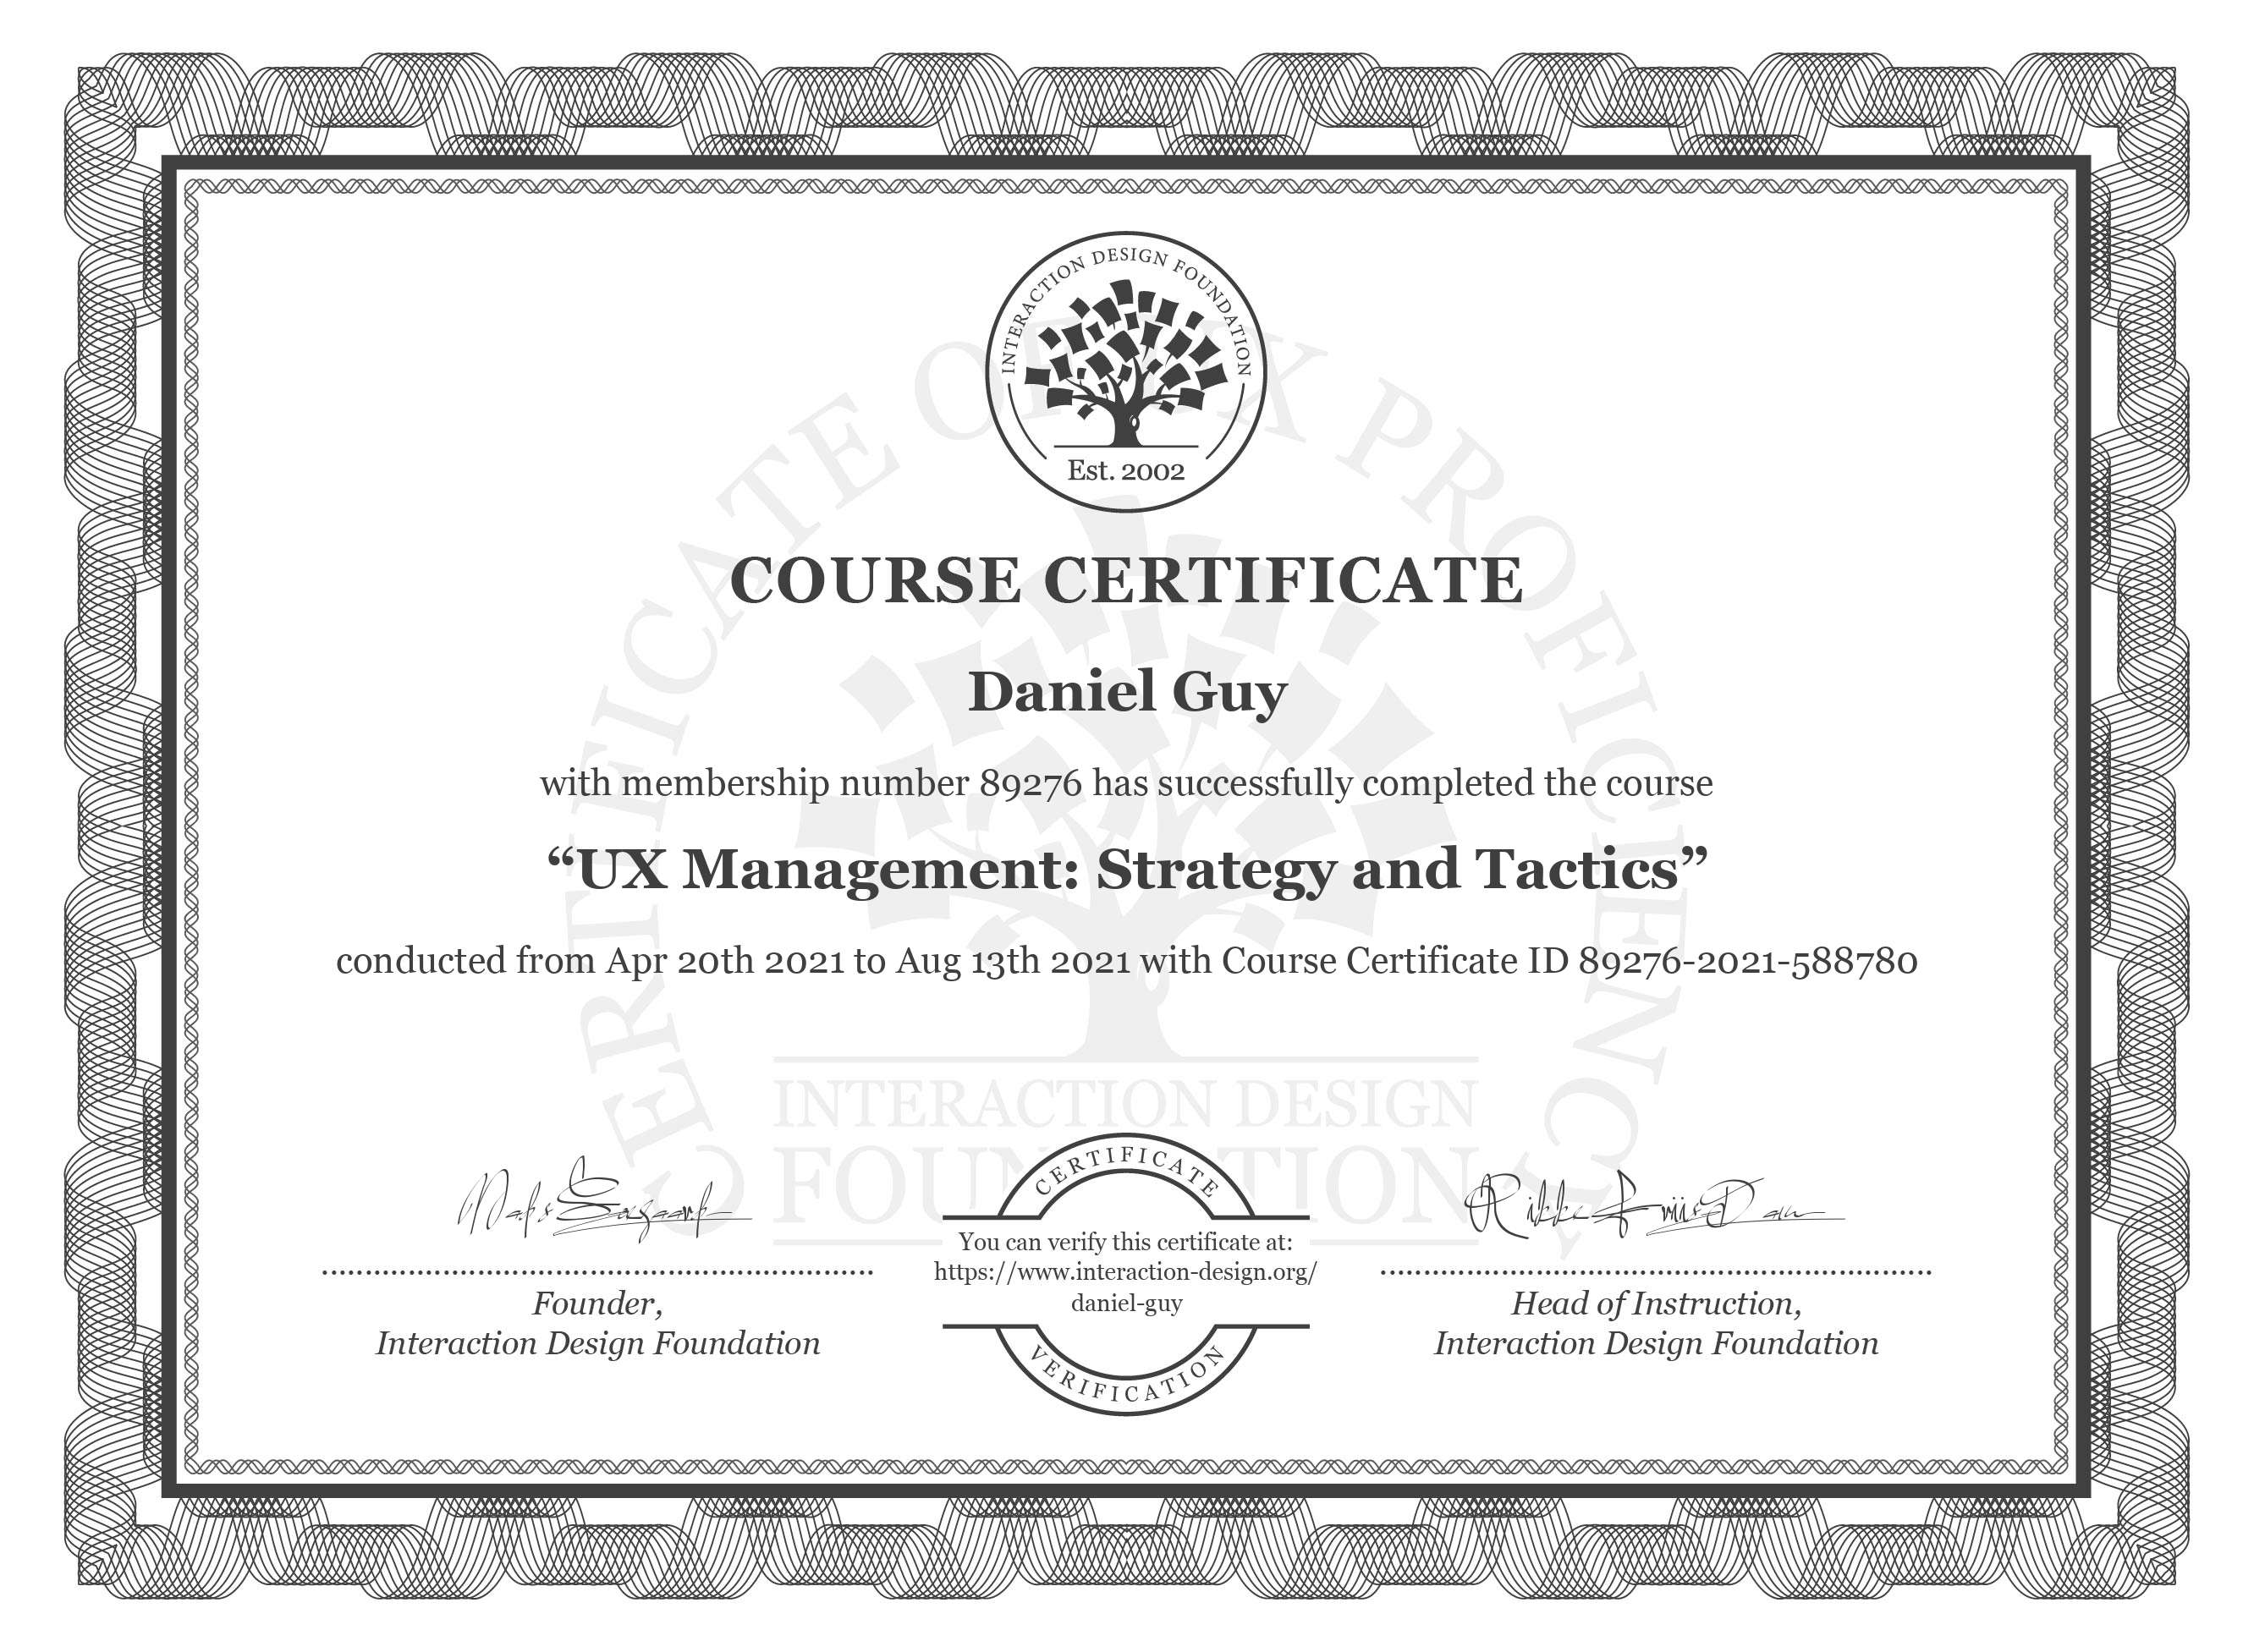 Certificate for UX Management course